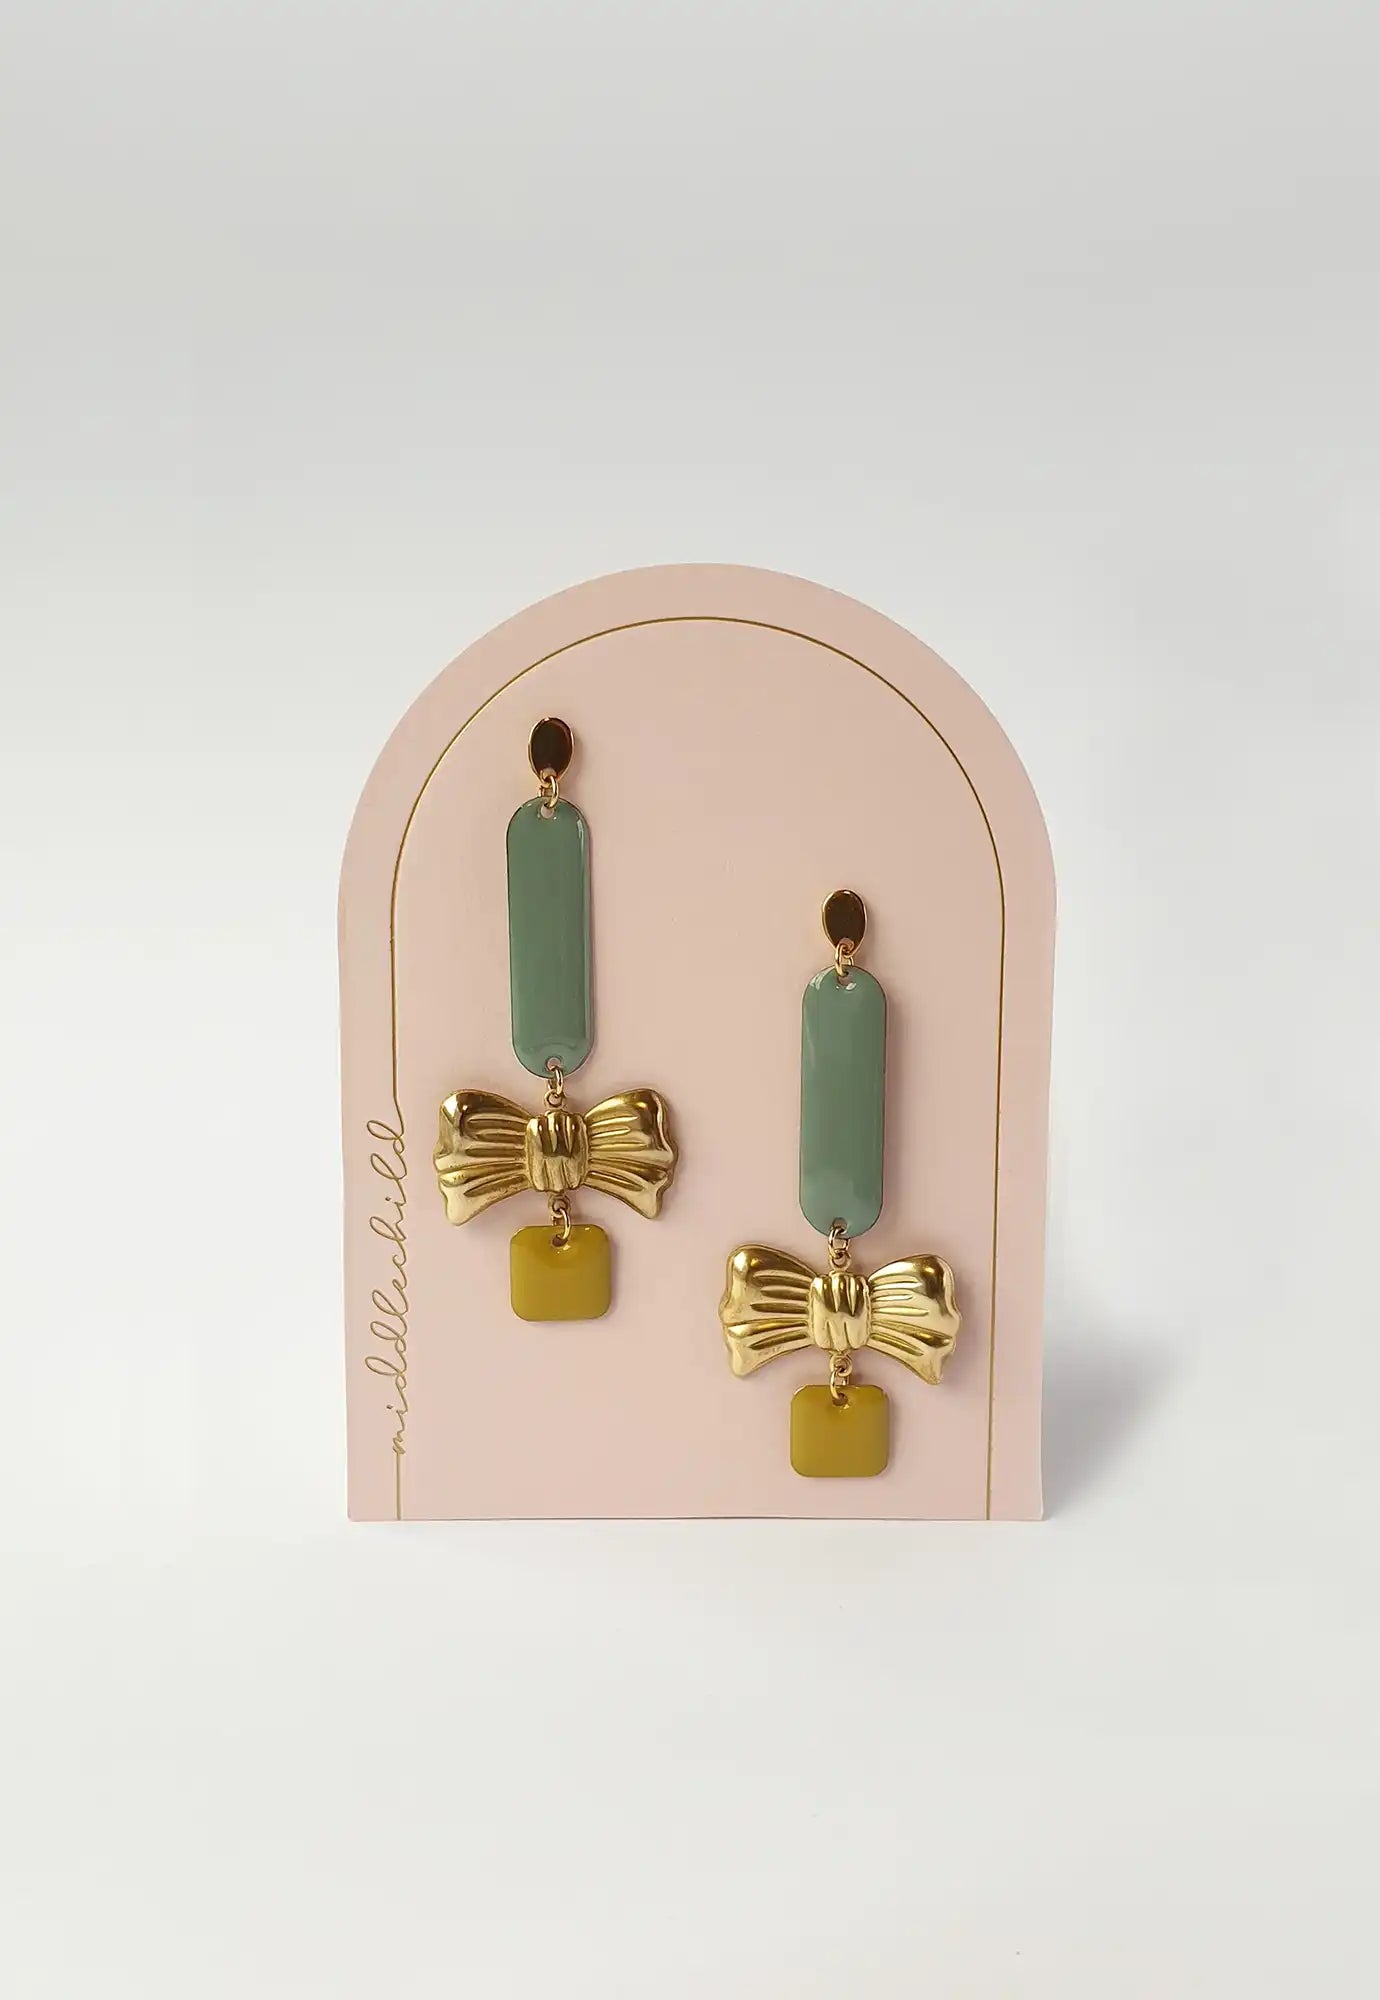 middle child - accolade earrings